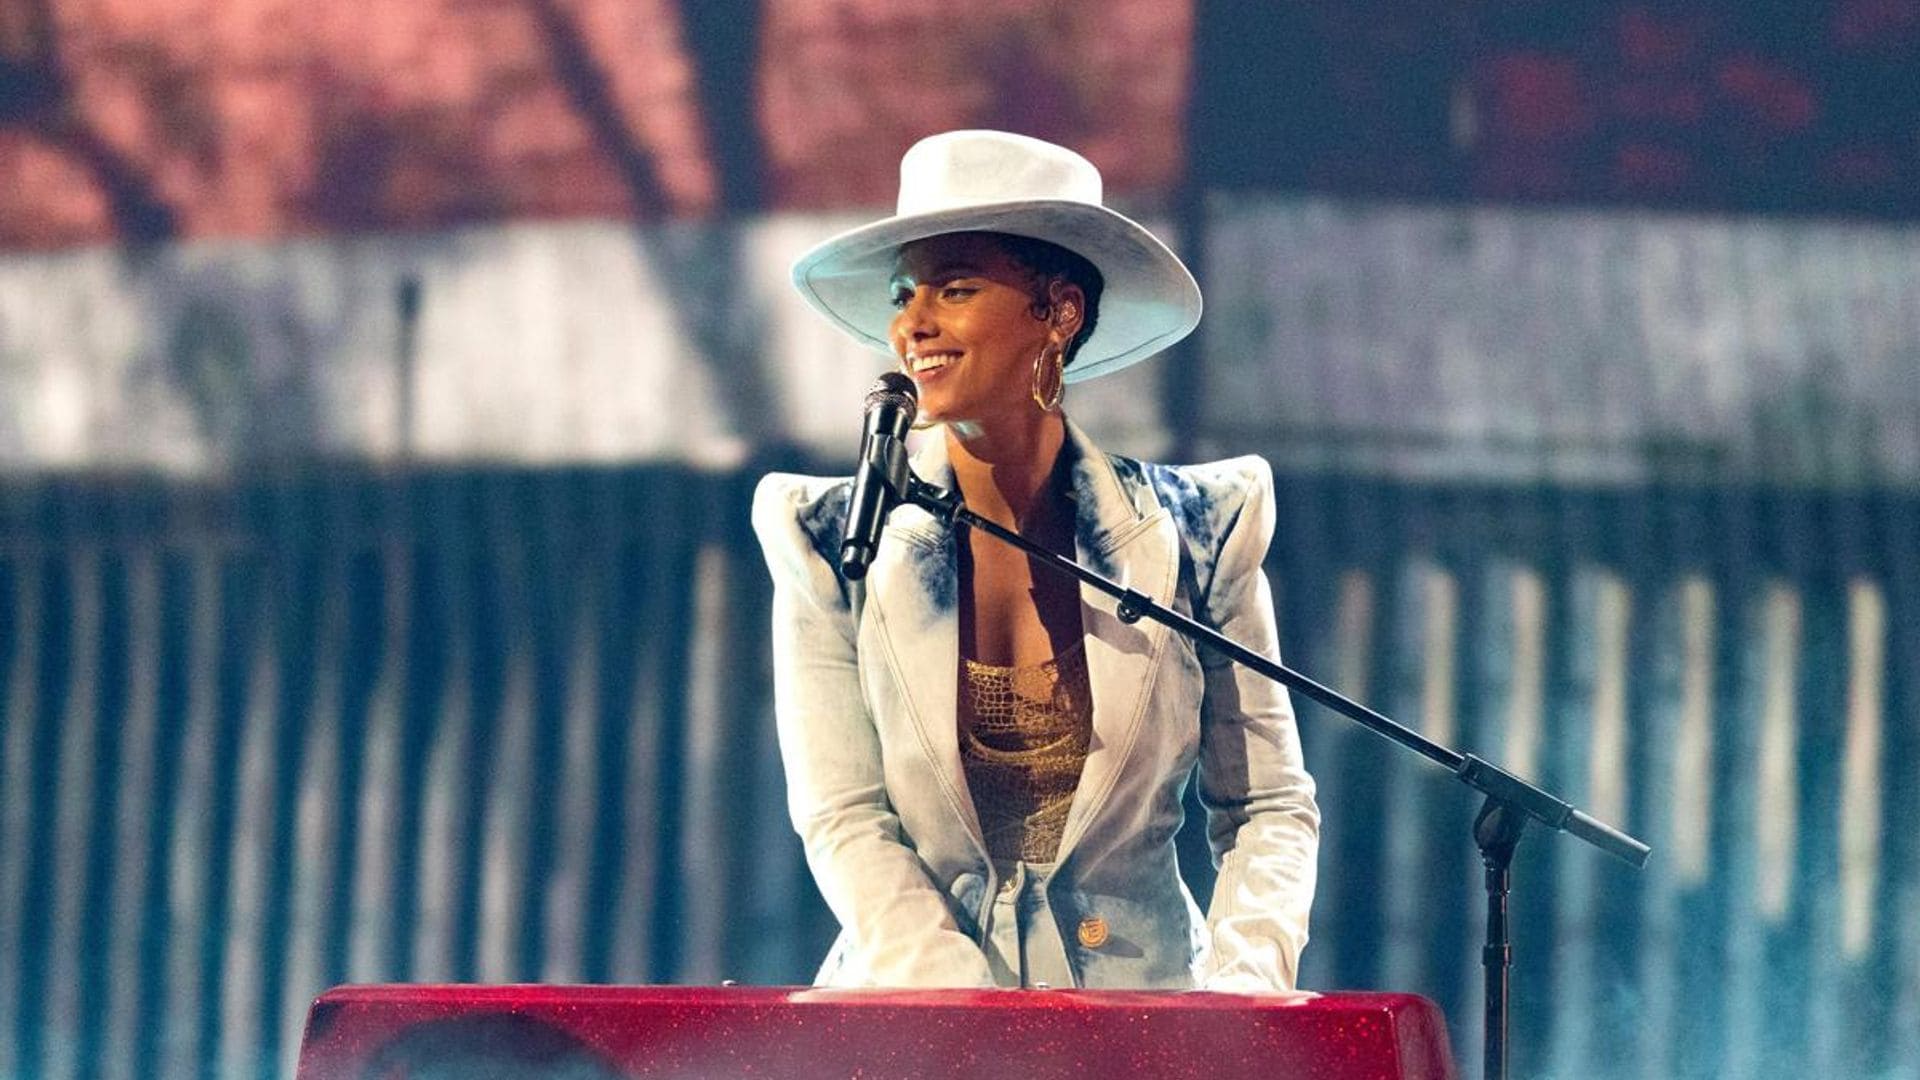 Alicia Keys praises 11-year-old son after playing the piano in front of 17,000 people